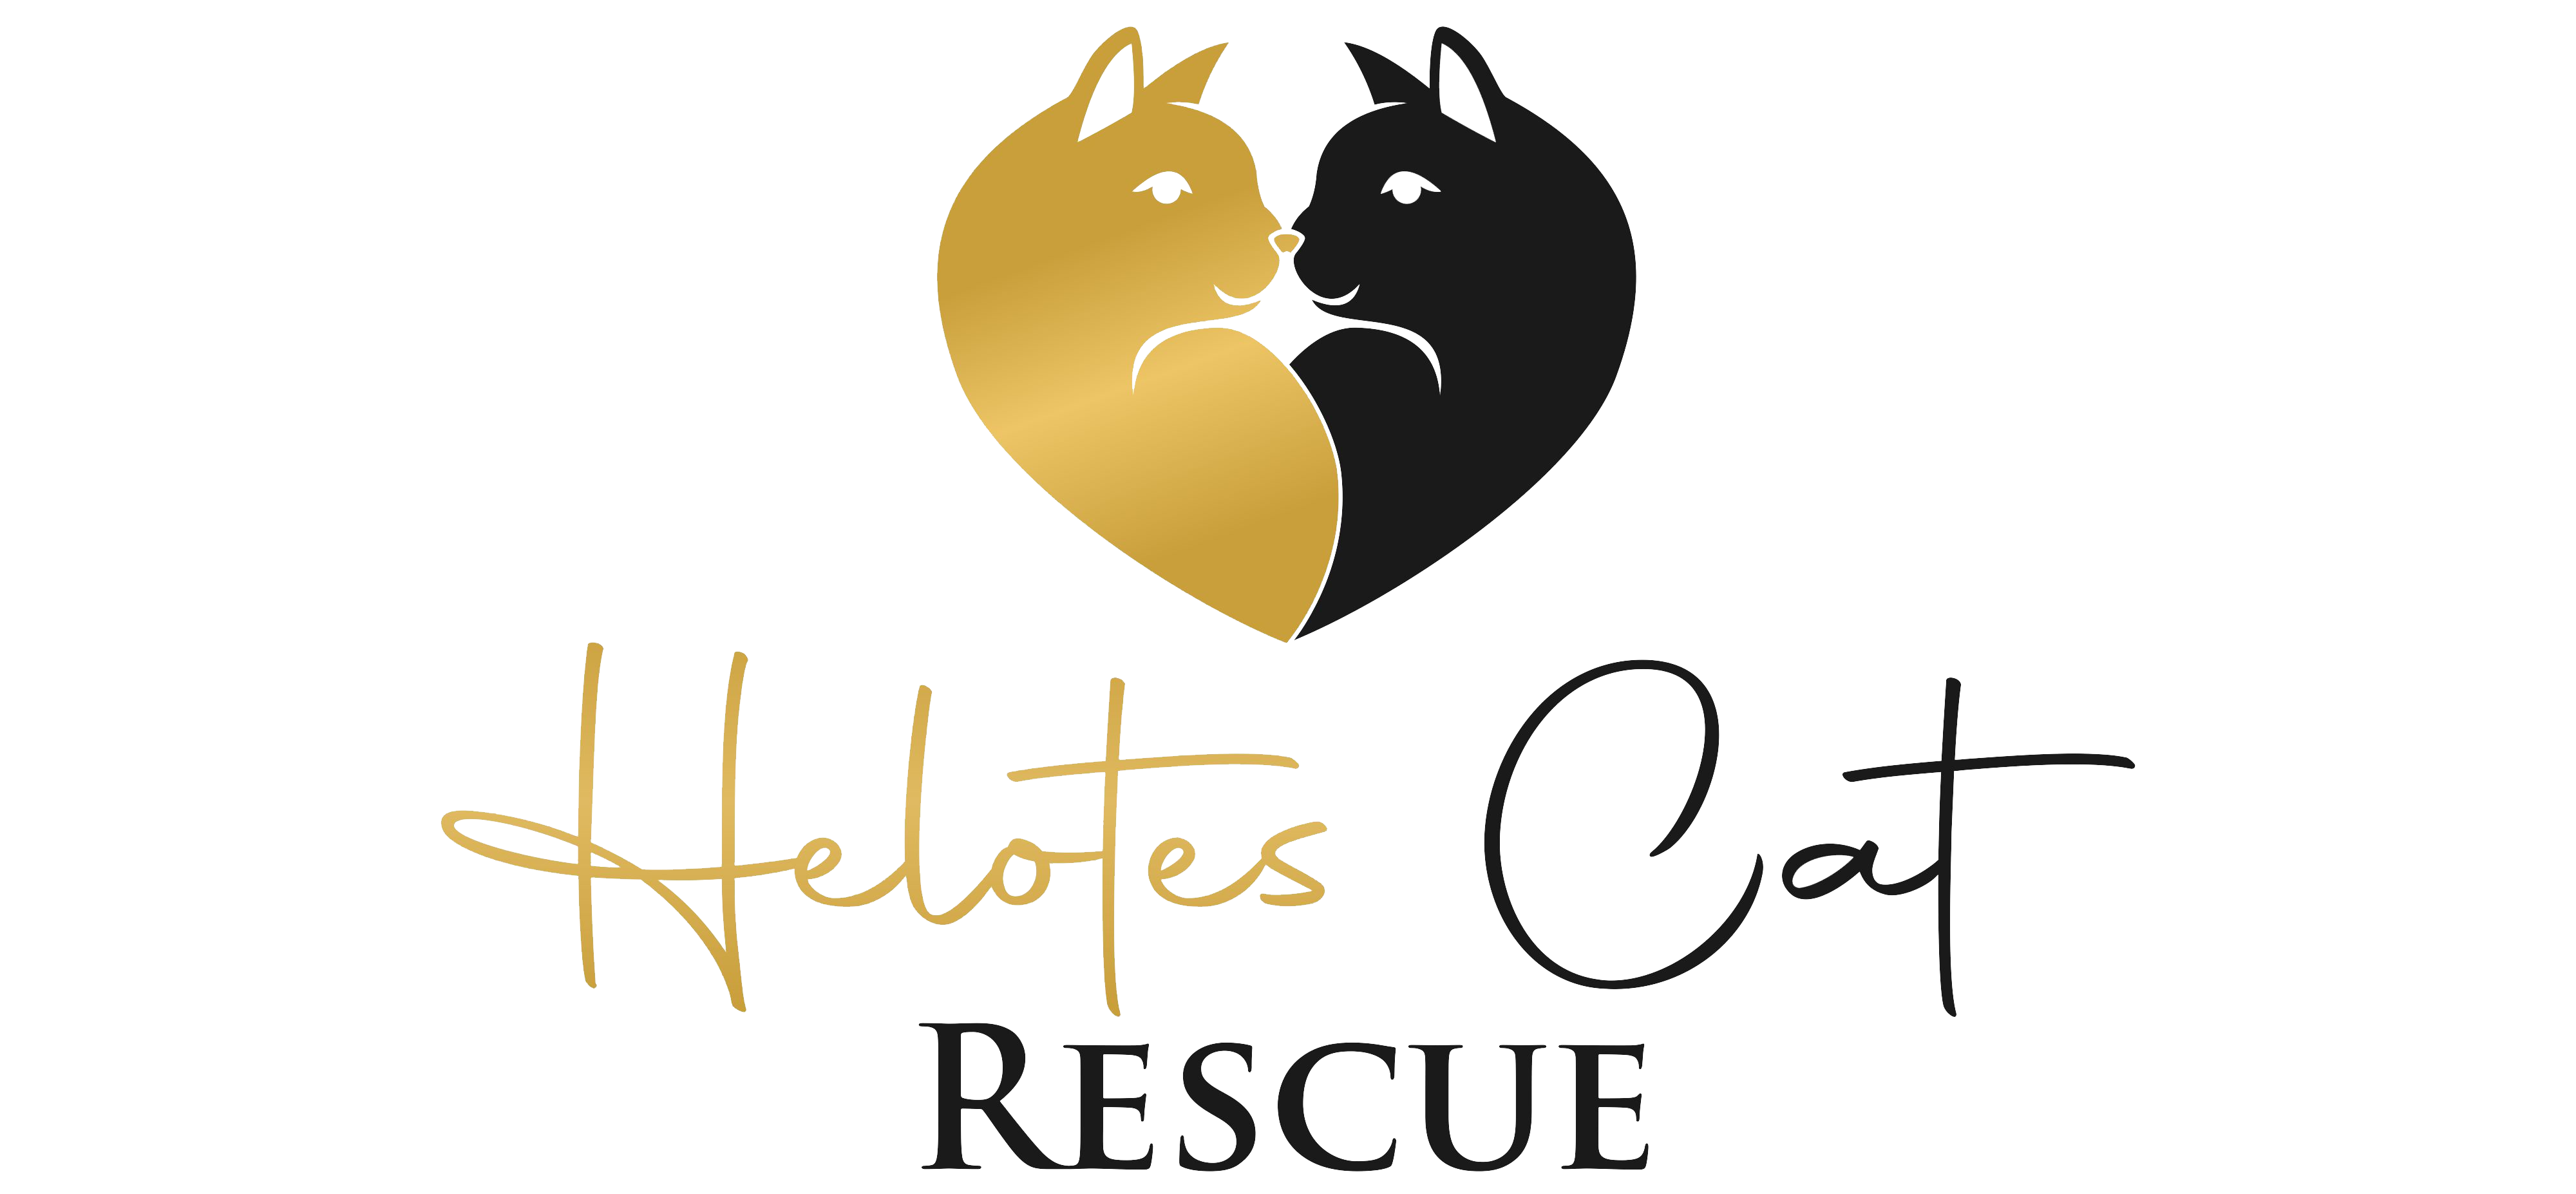 Helotes Cat Rescue